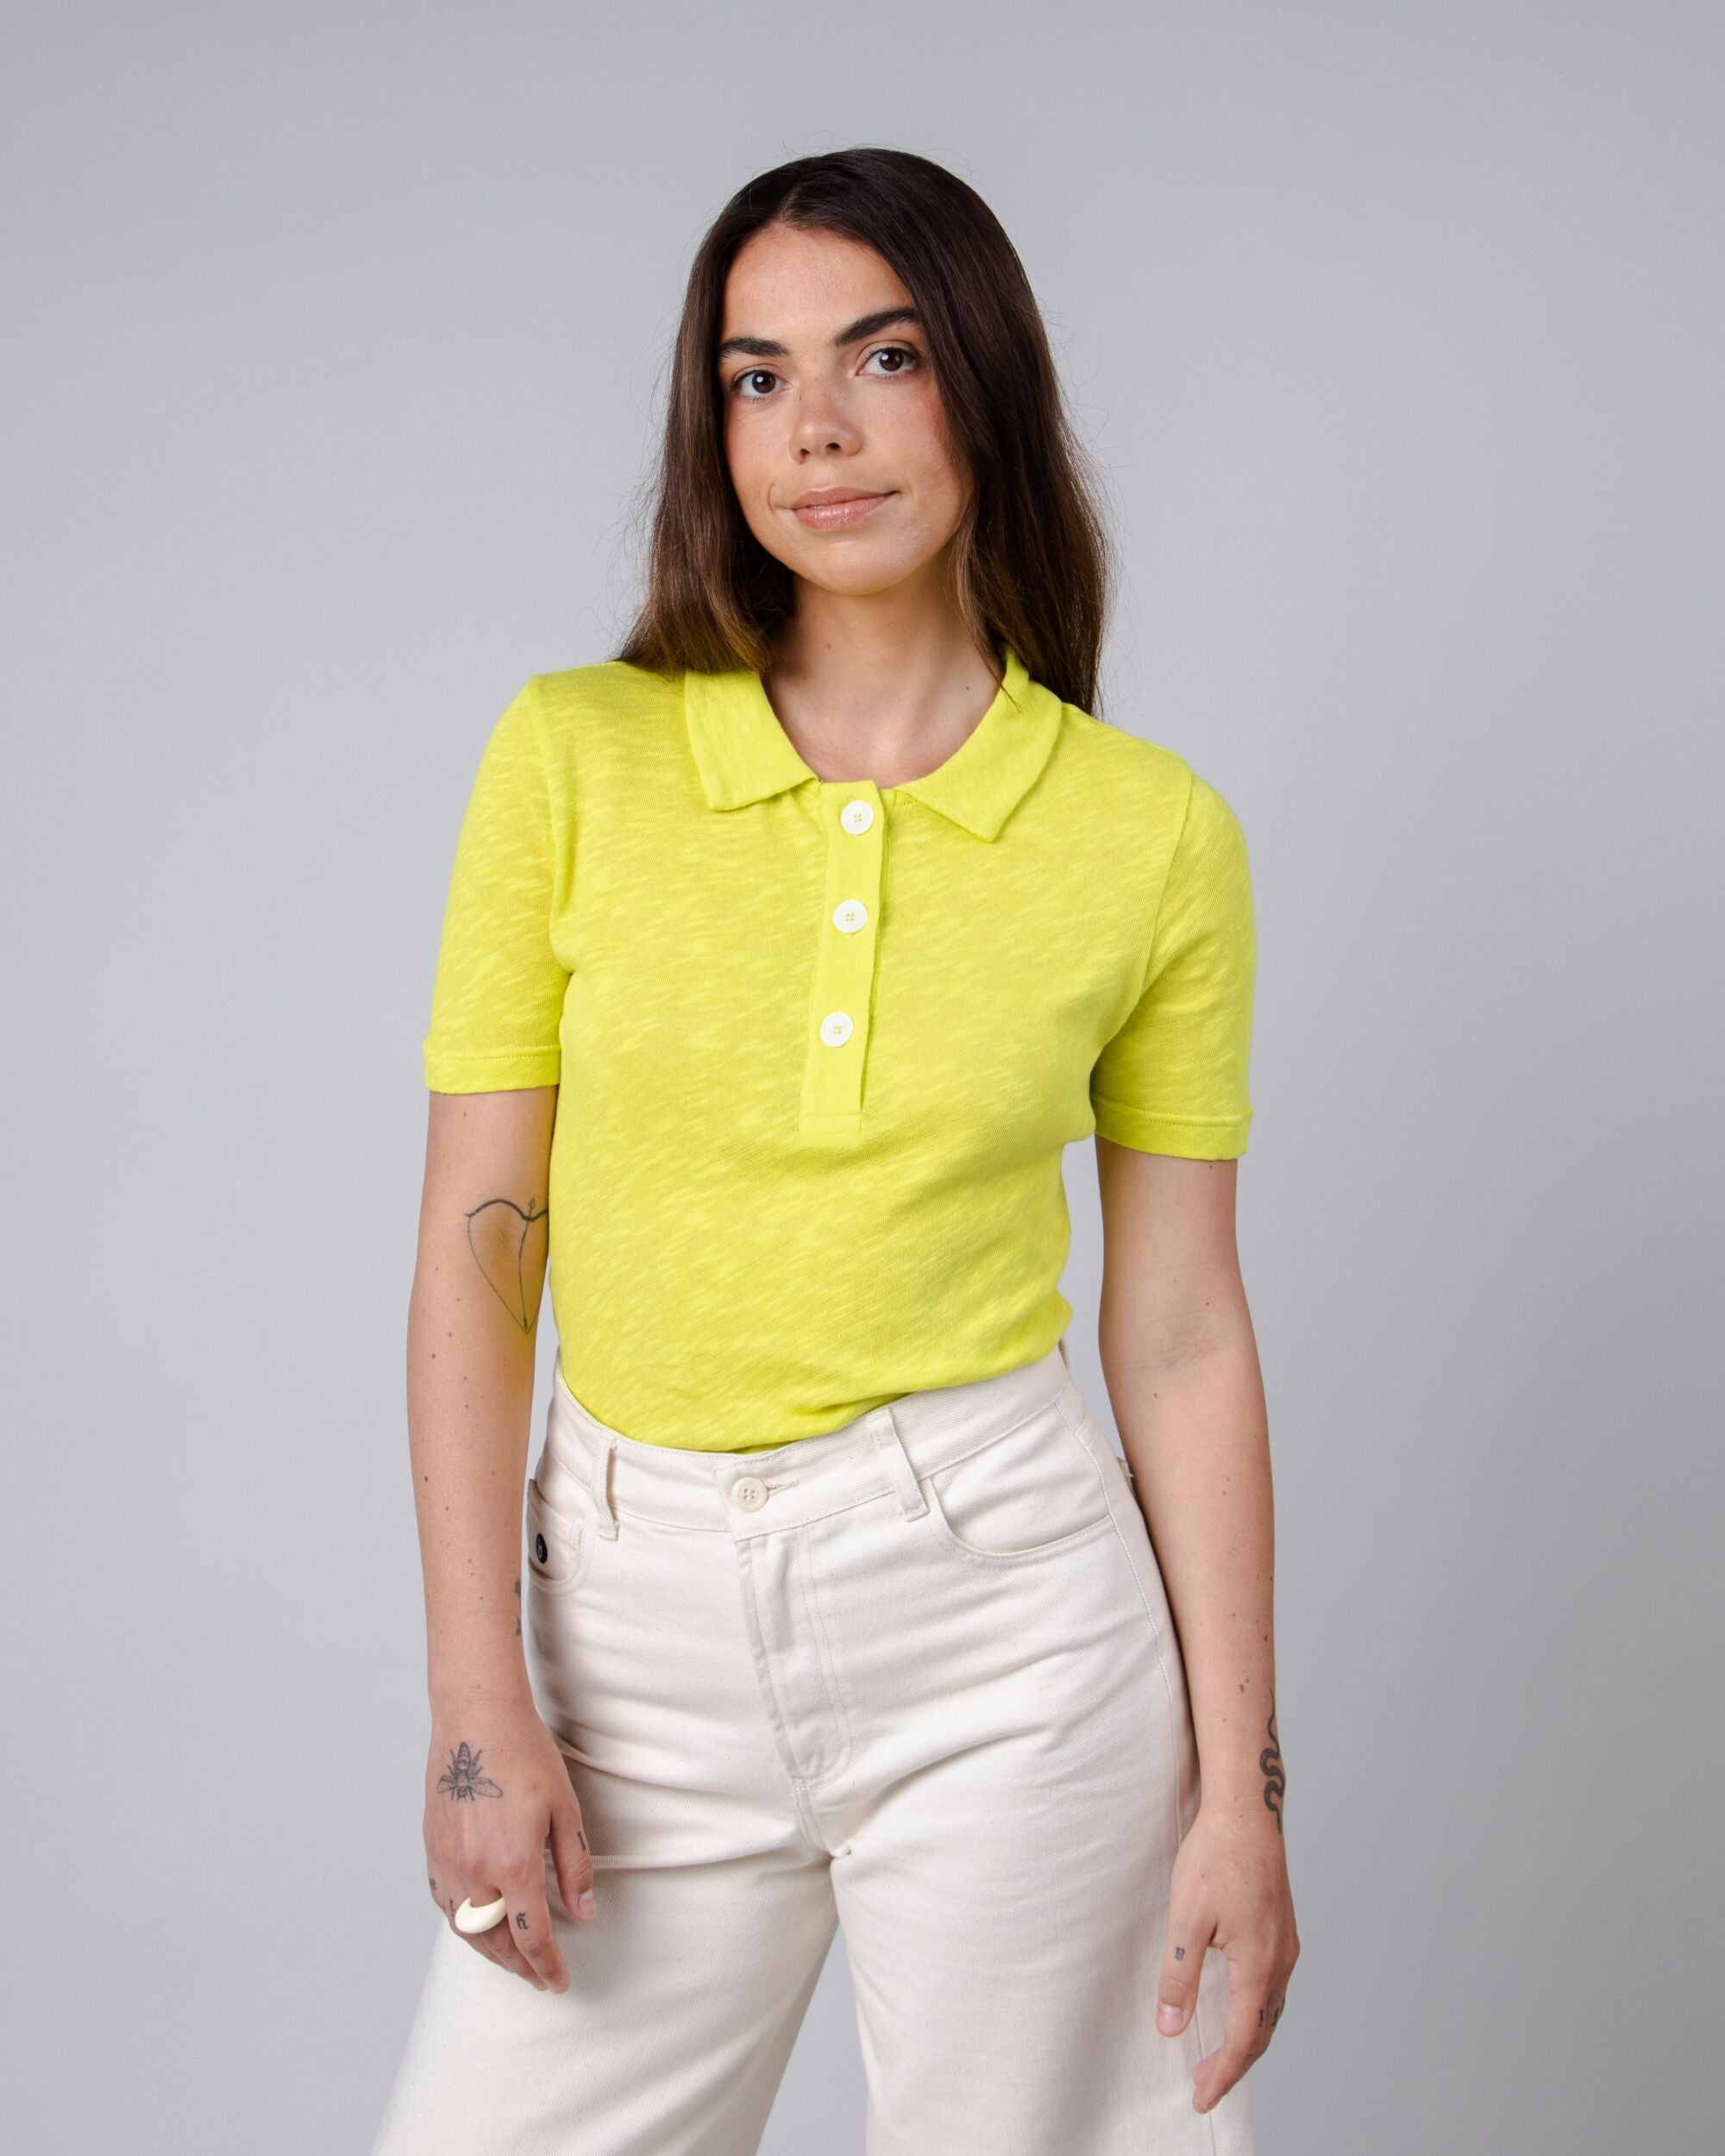 Buttoned polo shirt in lime made from organic cotton by Brava Fabrics